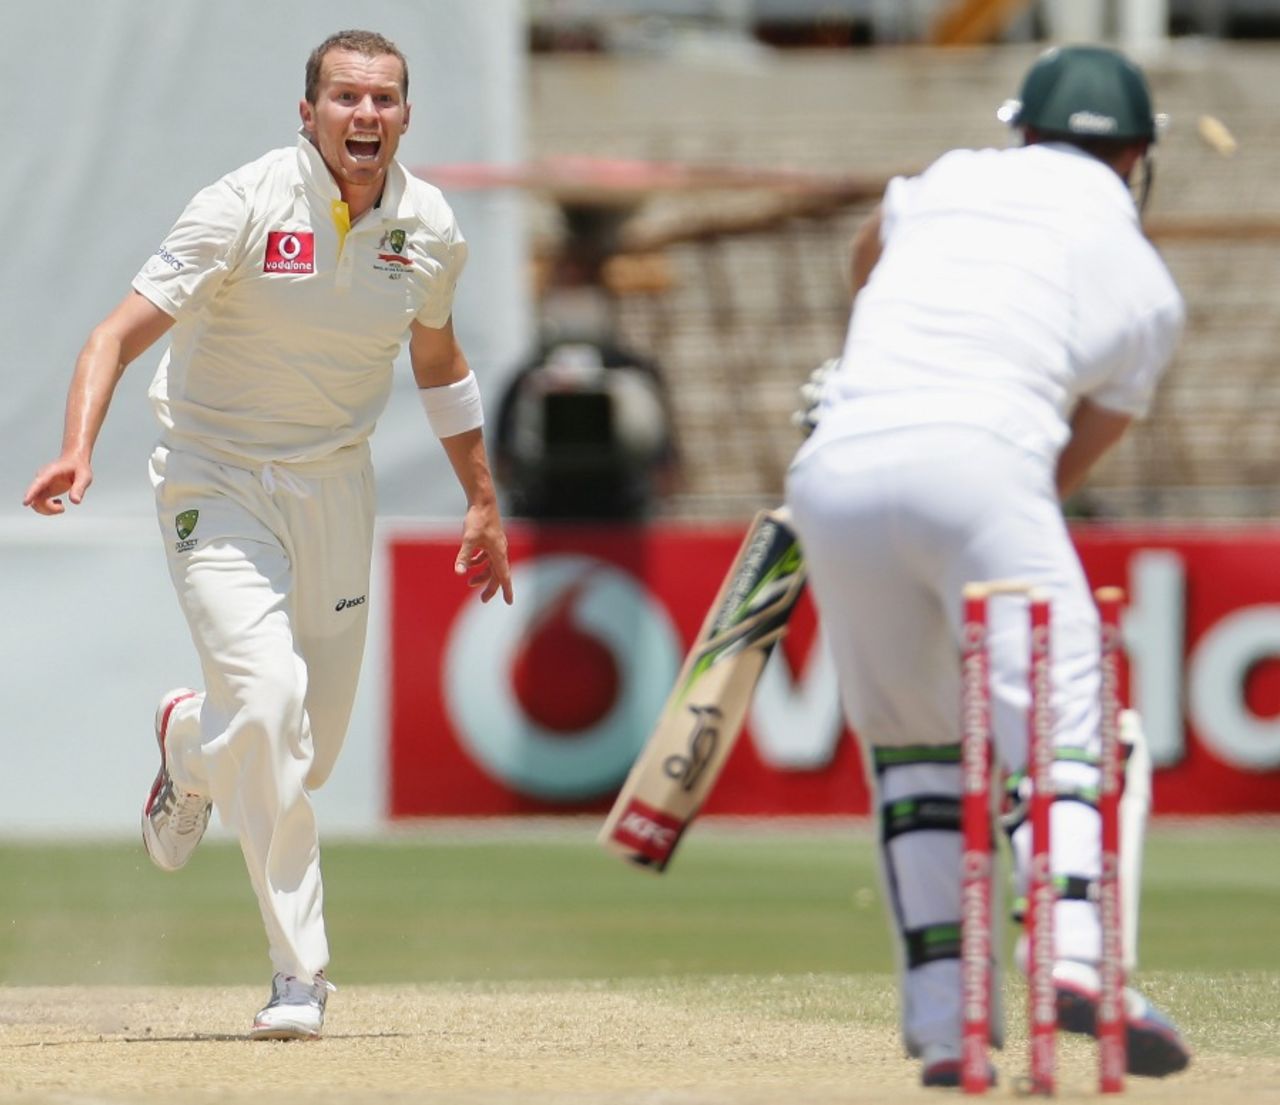 Peter Siddle bowls AB de Villiers, Australia v South Africa, 2nd Test, Adelaide, 5th day, November 26, 2012